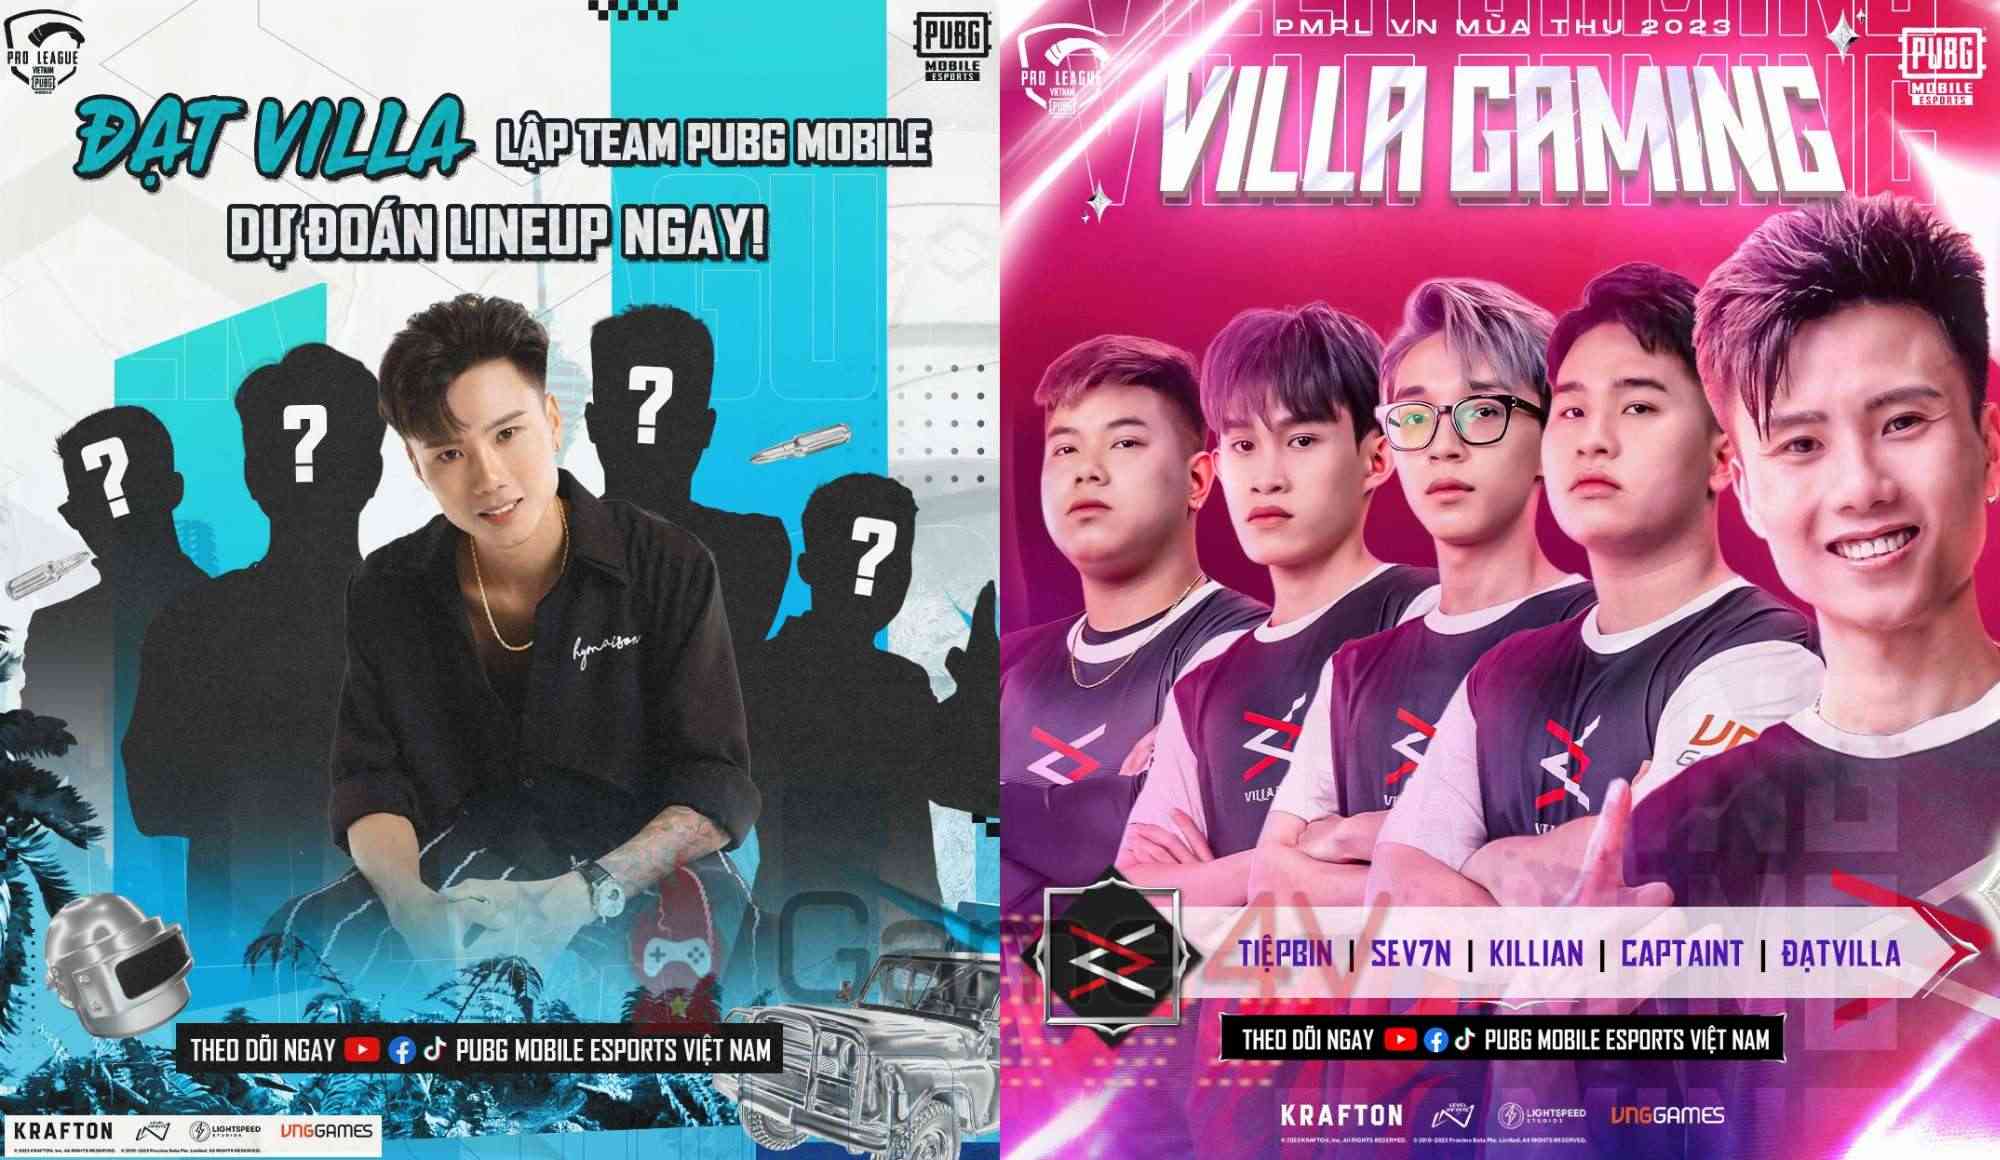 The scandalous TikToker became a player in the top PUBG Mobile tournament in Vietnam and was ‘stoned’ by fans